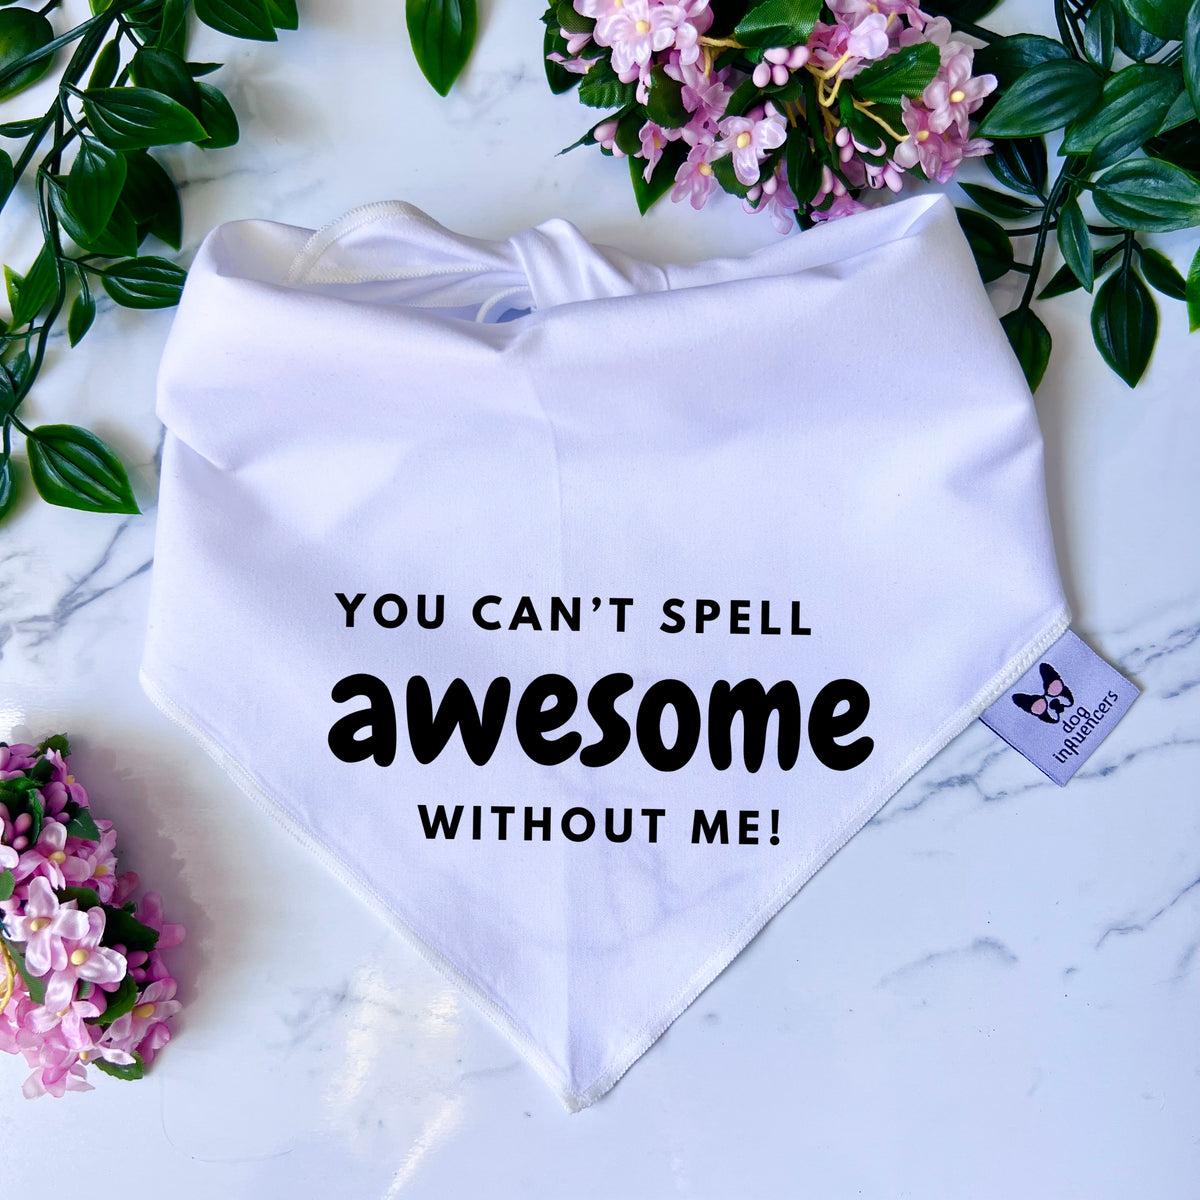 Taylor Swift Dog Bandana - "You can't spell AWESOME without me" - Inspired by the song "Me!" - Gift for a Fan Dog Mum